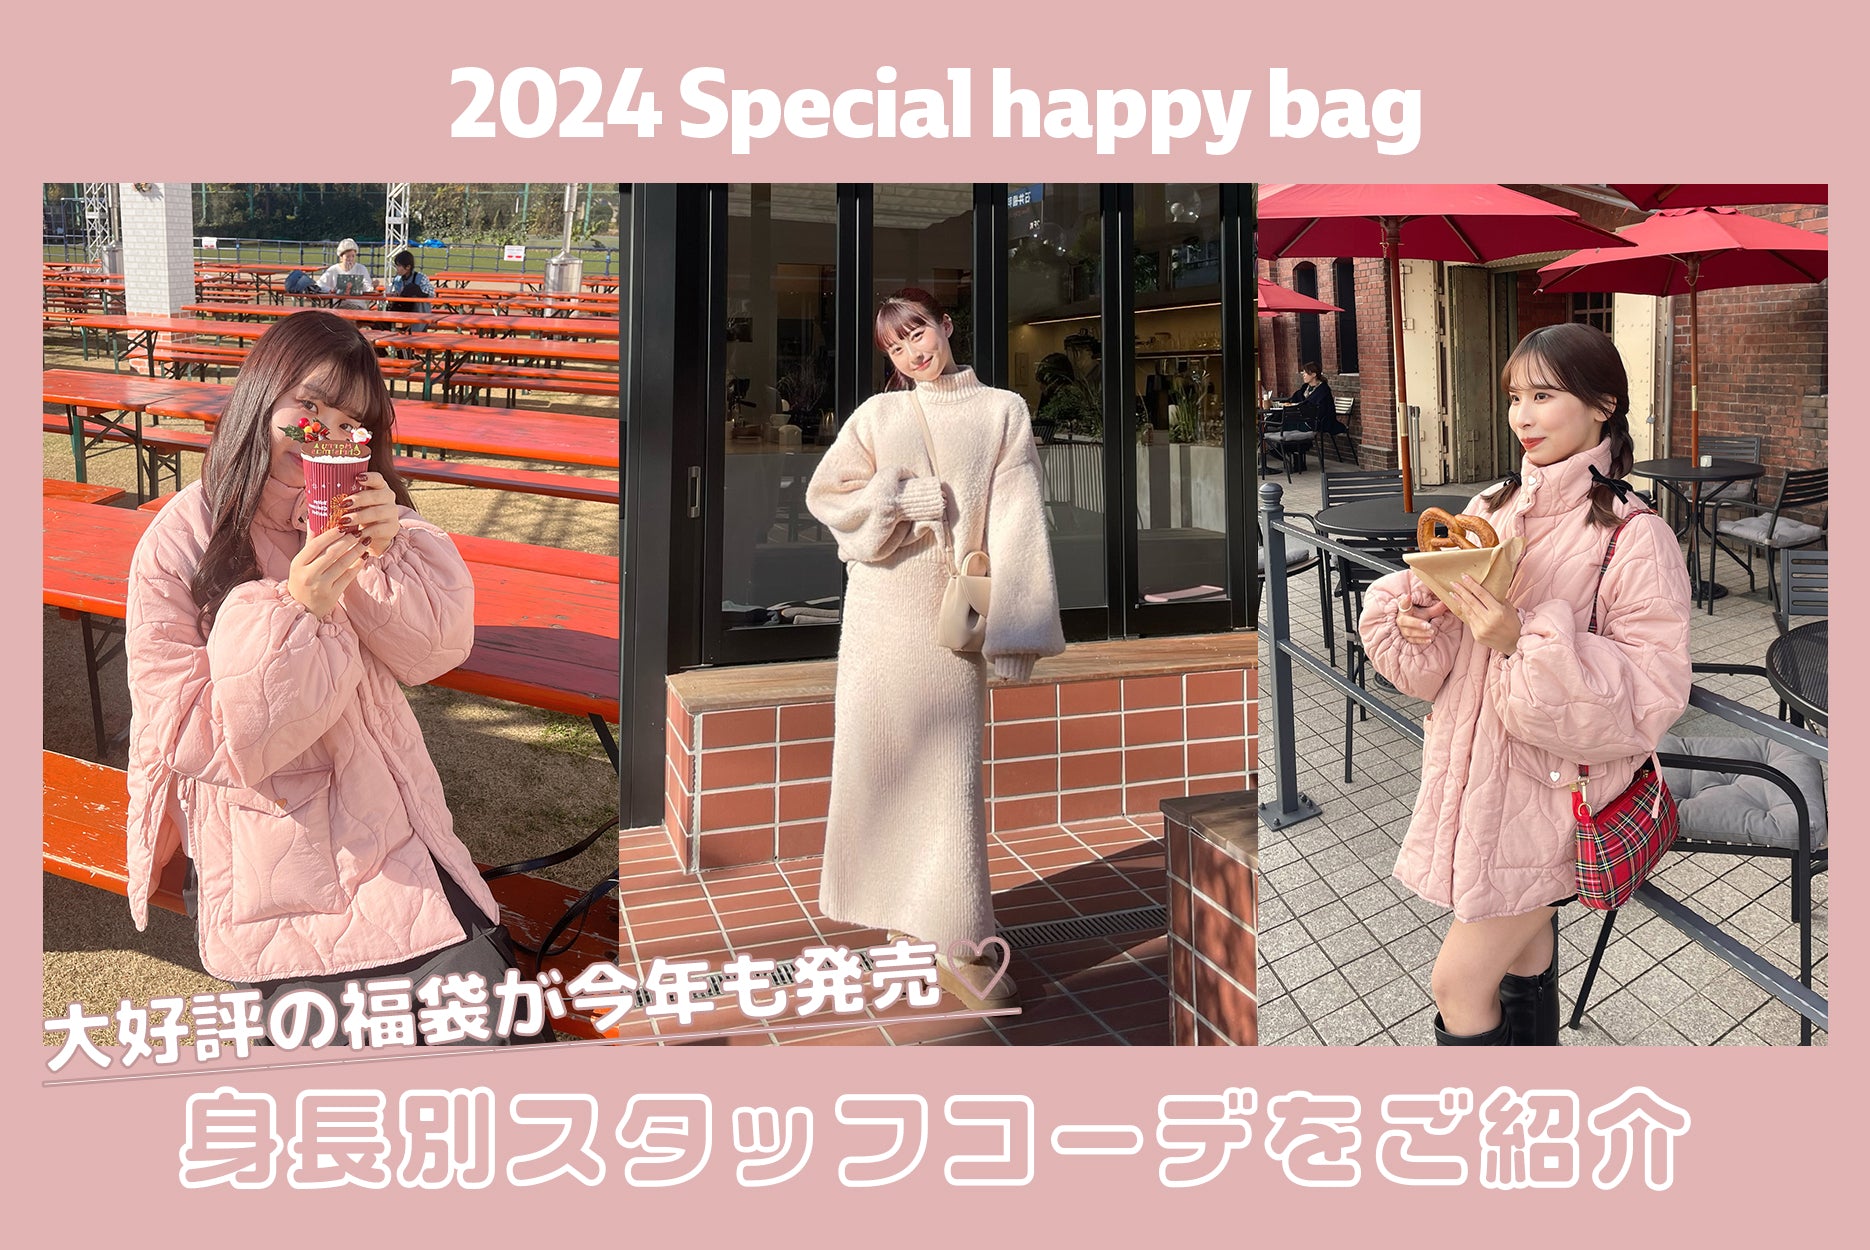 2024 SPECIAL HAPPY BAG｜milky knit set up